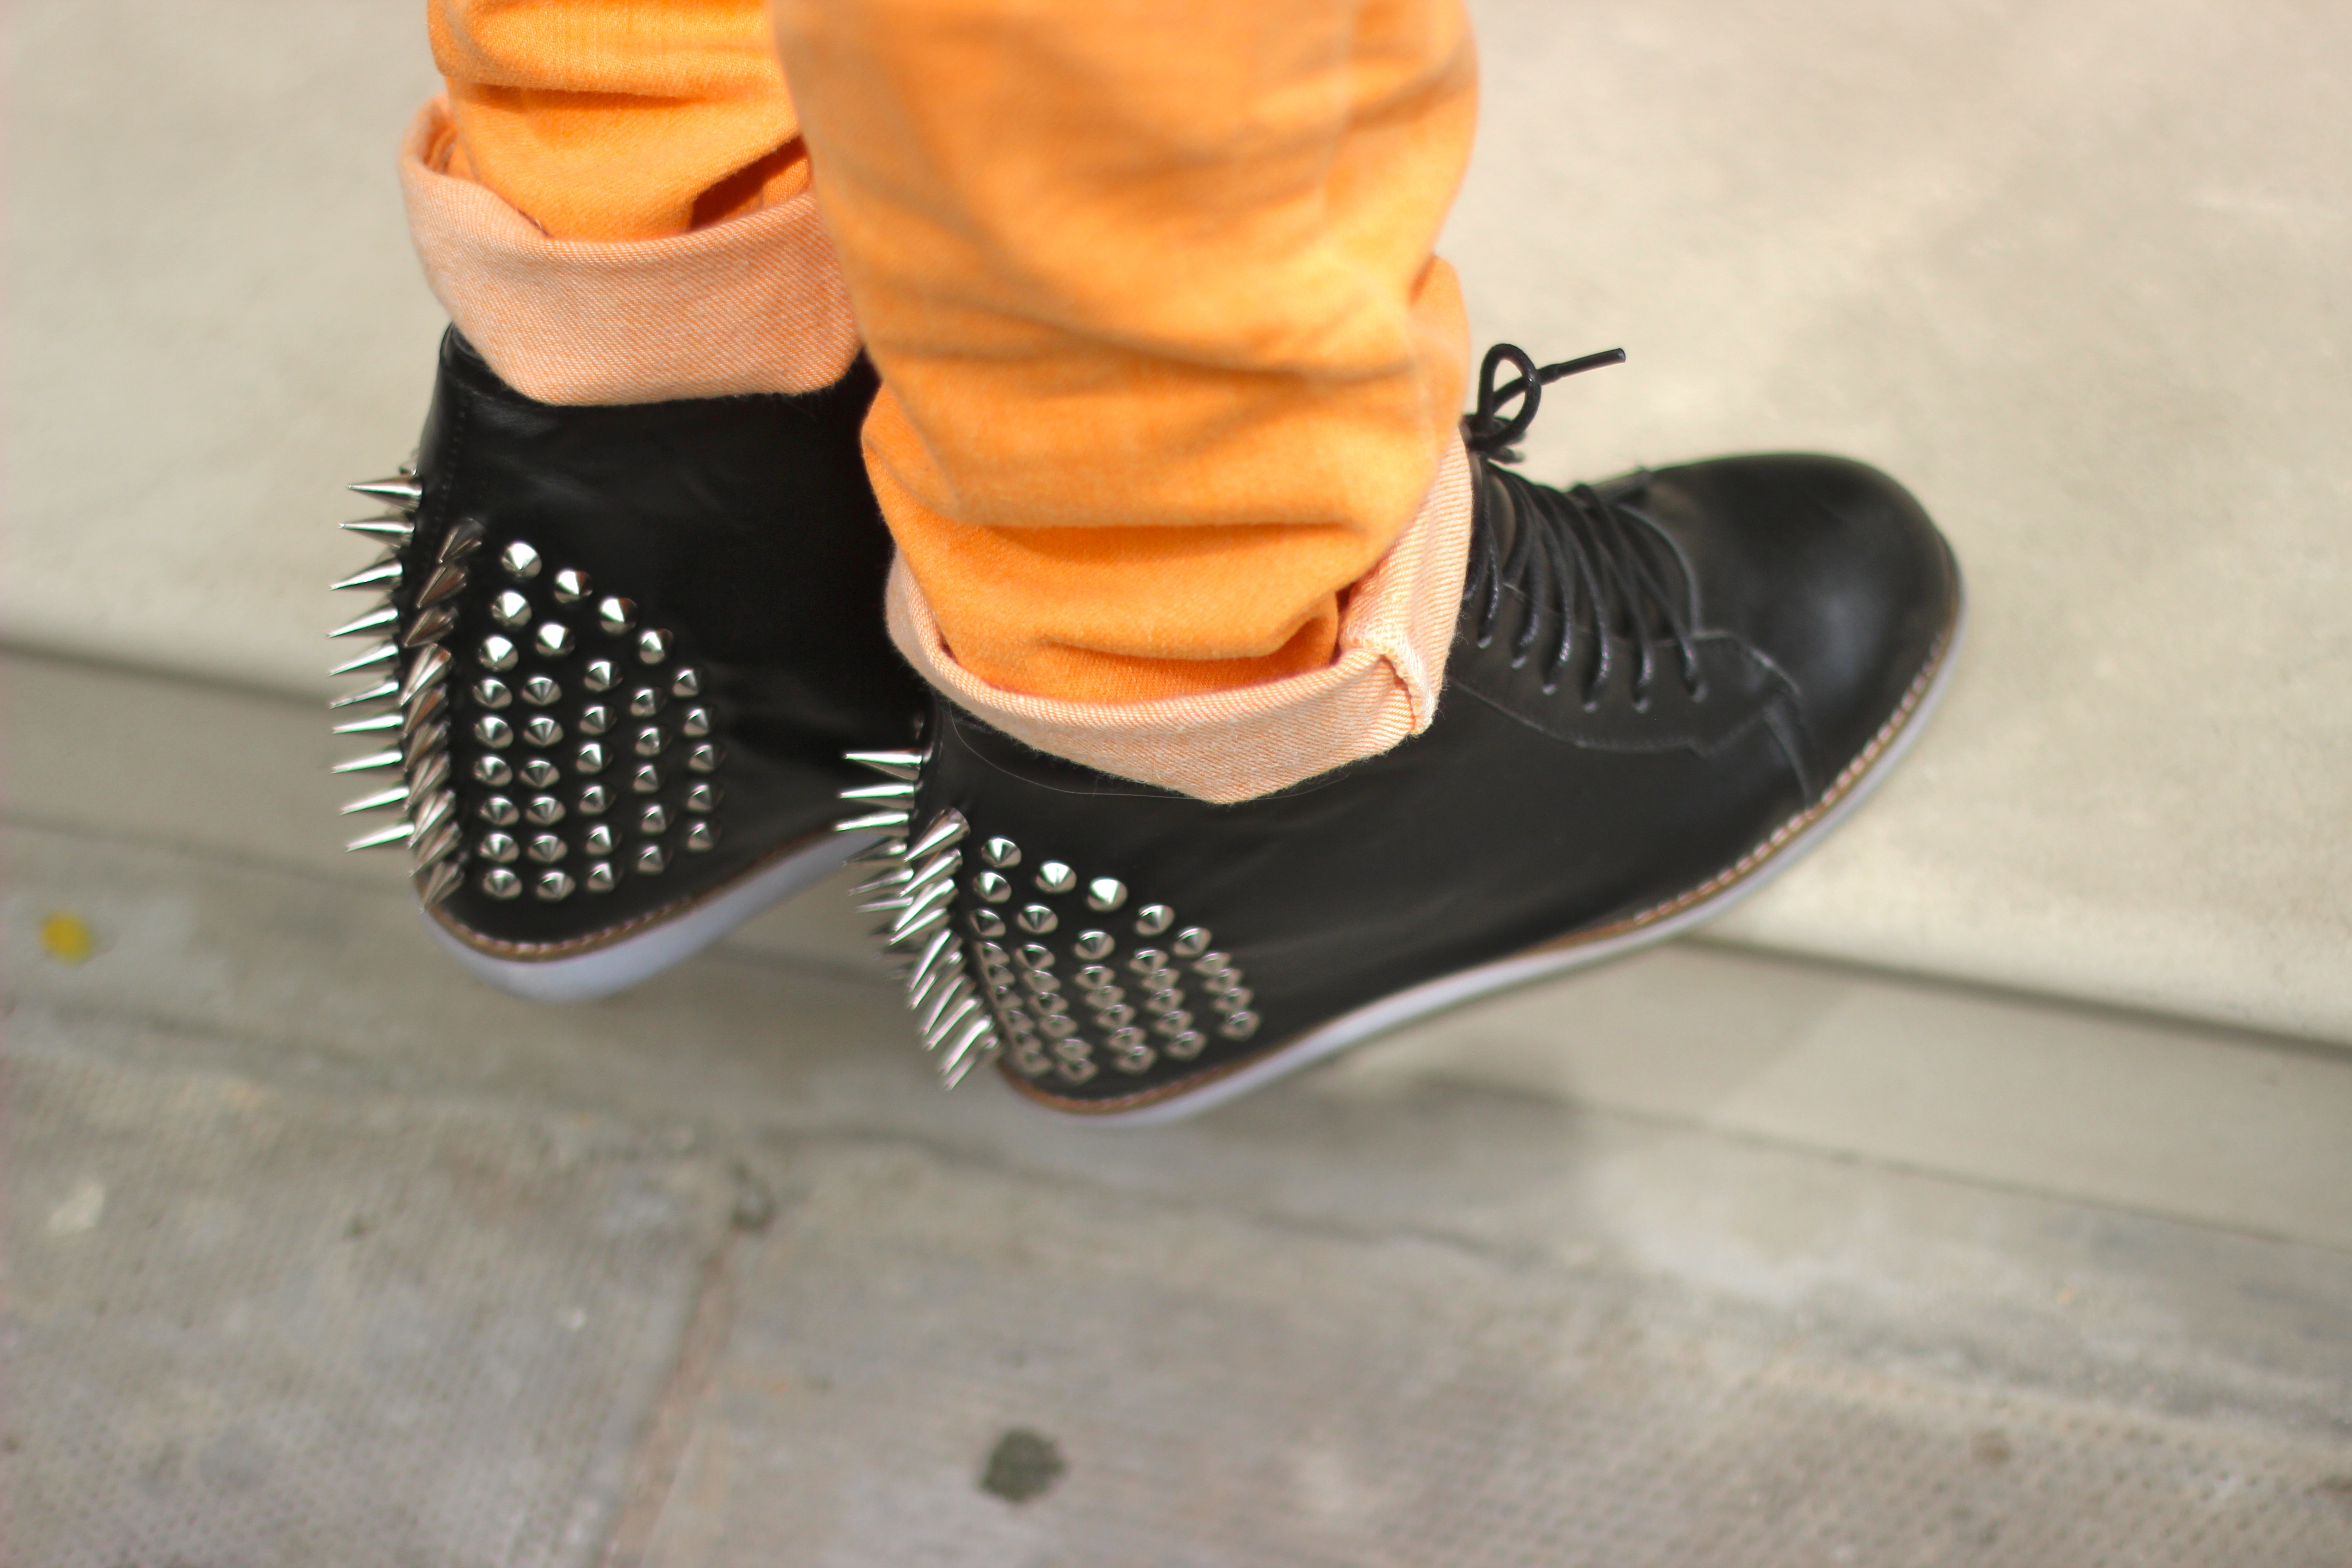 jeffrey campbell spiked sneakers fashion blog fashion blogger